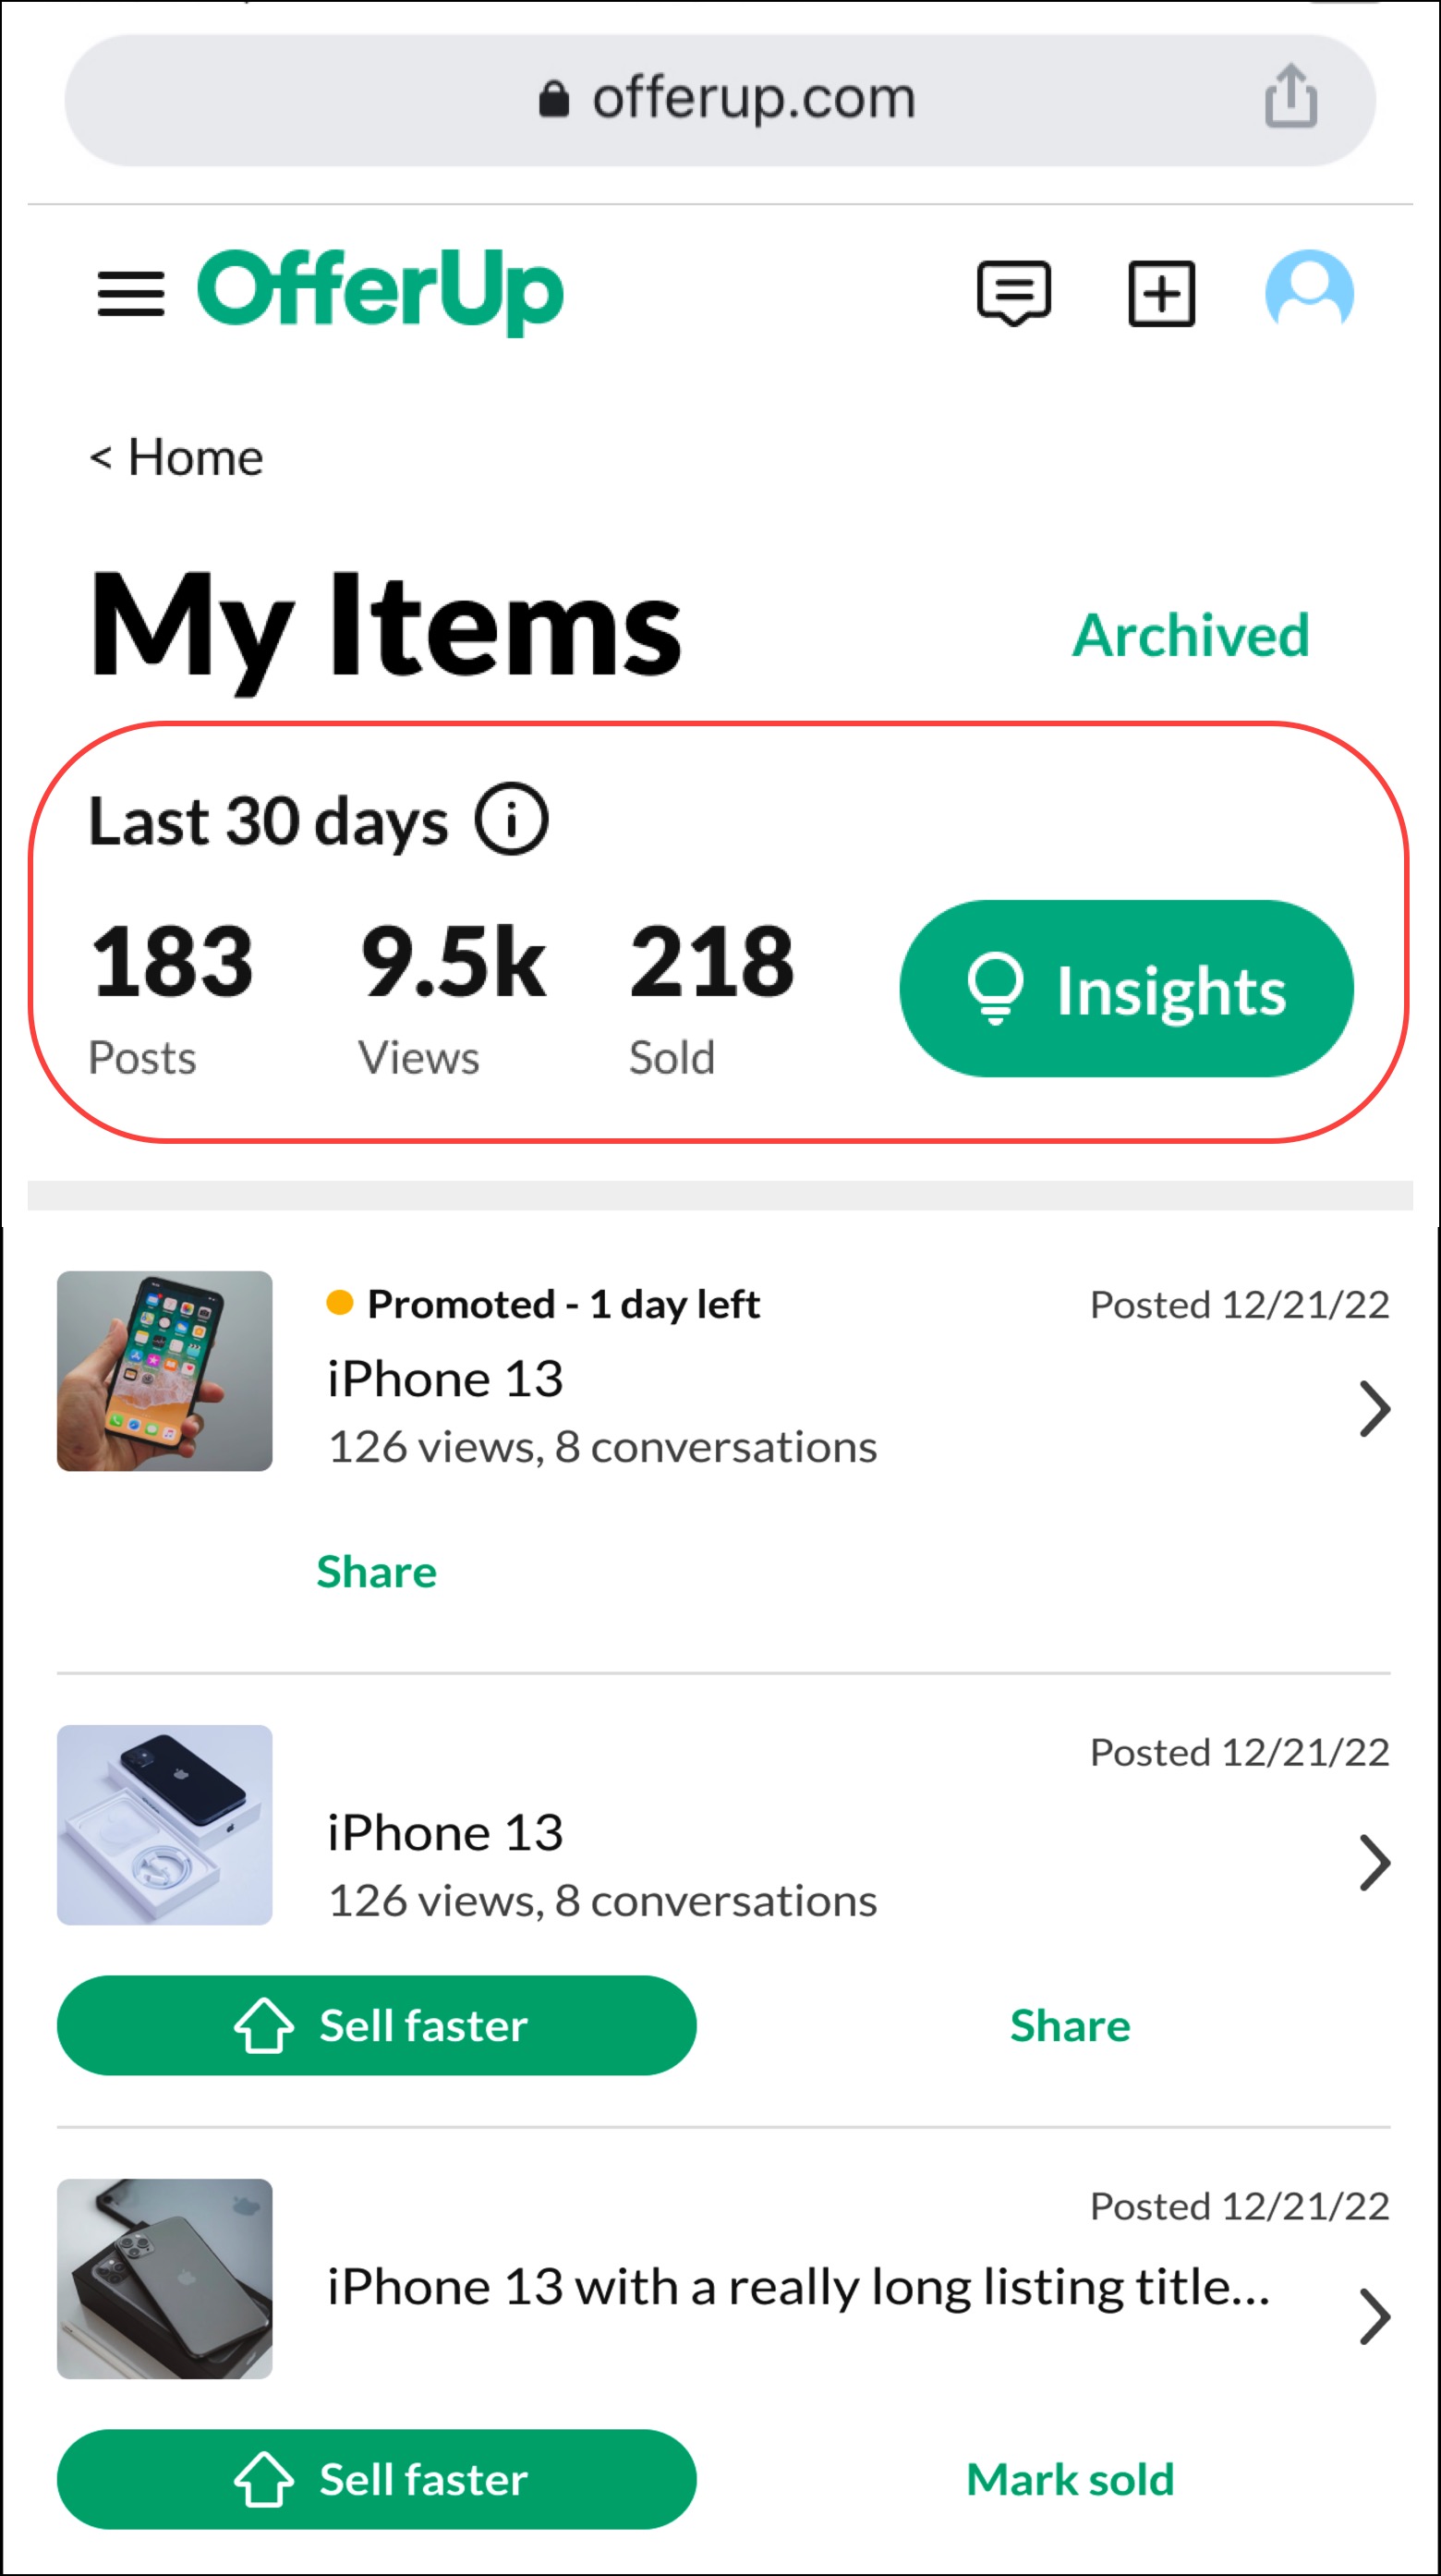 The Insights quick view shows the number of Posts, Views, and Items Sold.